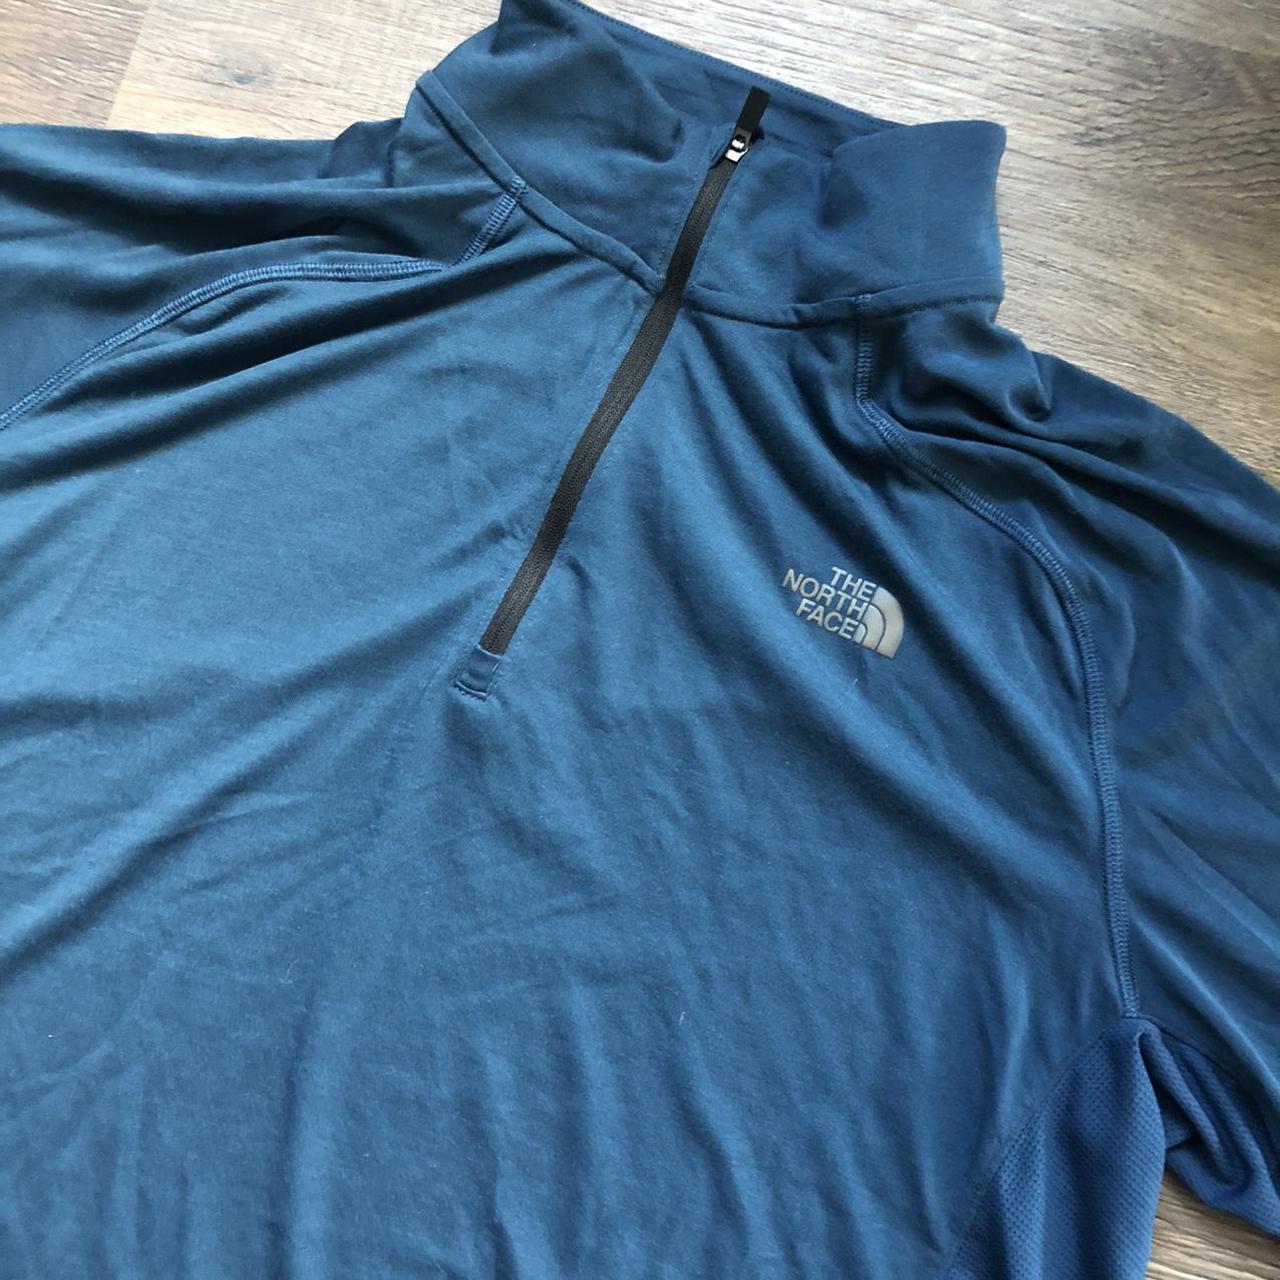 Product Image 3 - 🔥🏃THE NORTH FACE LONGSLEEVE🏃🔥
-Blue north